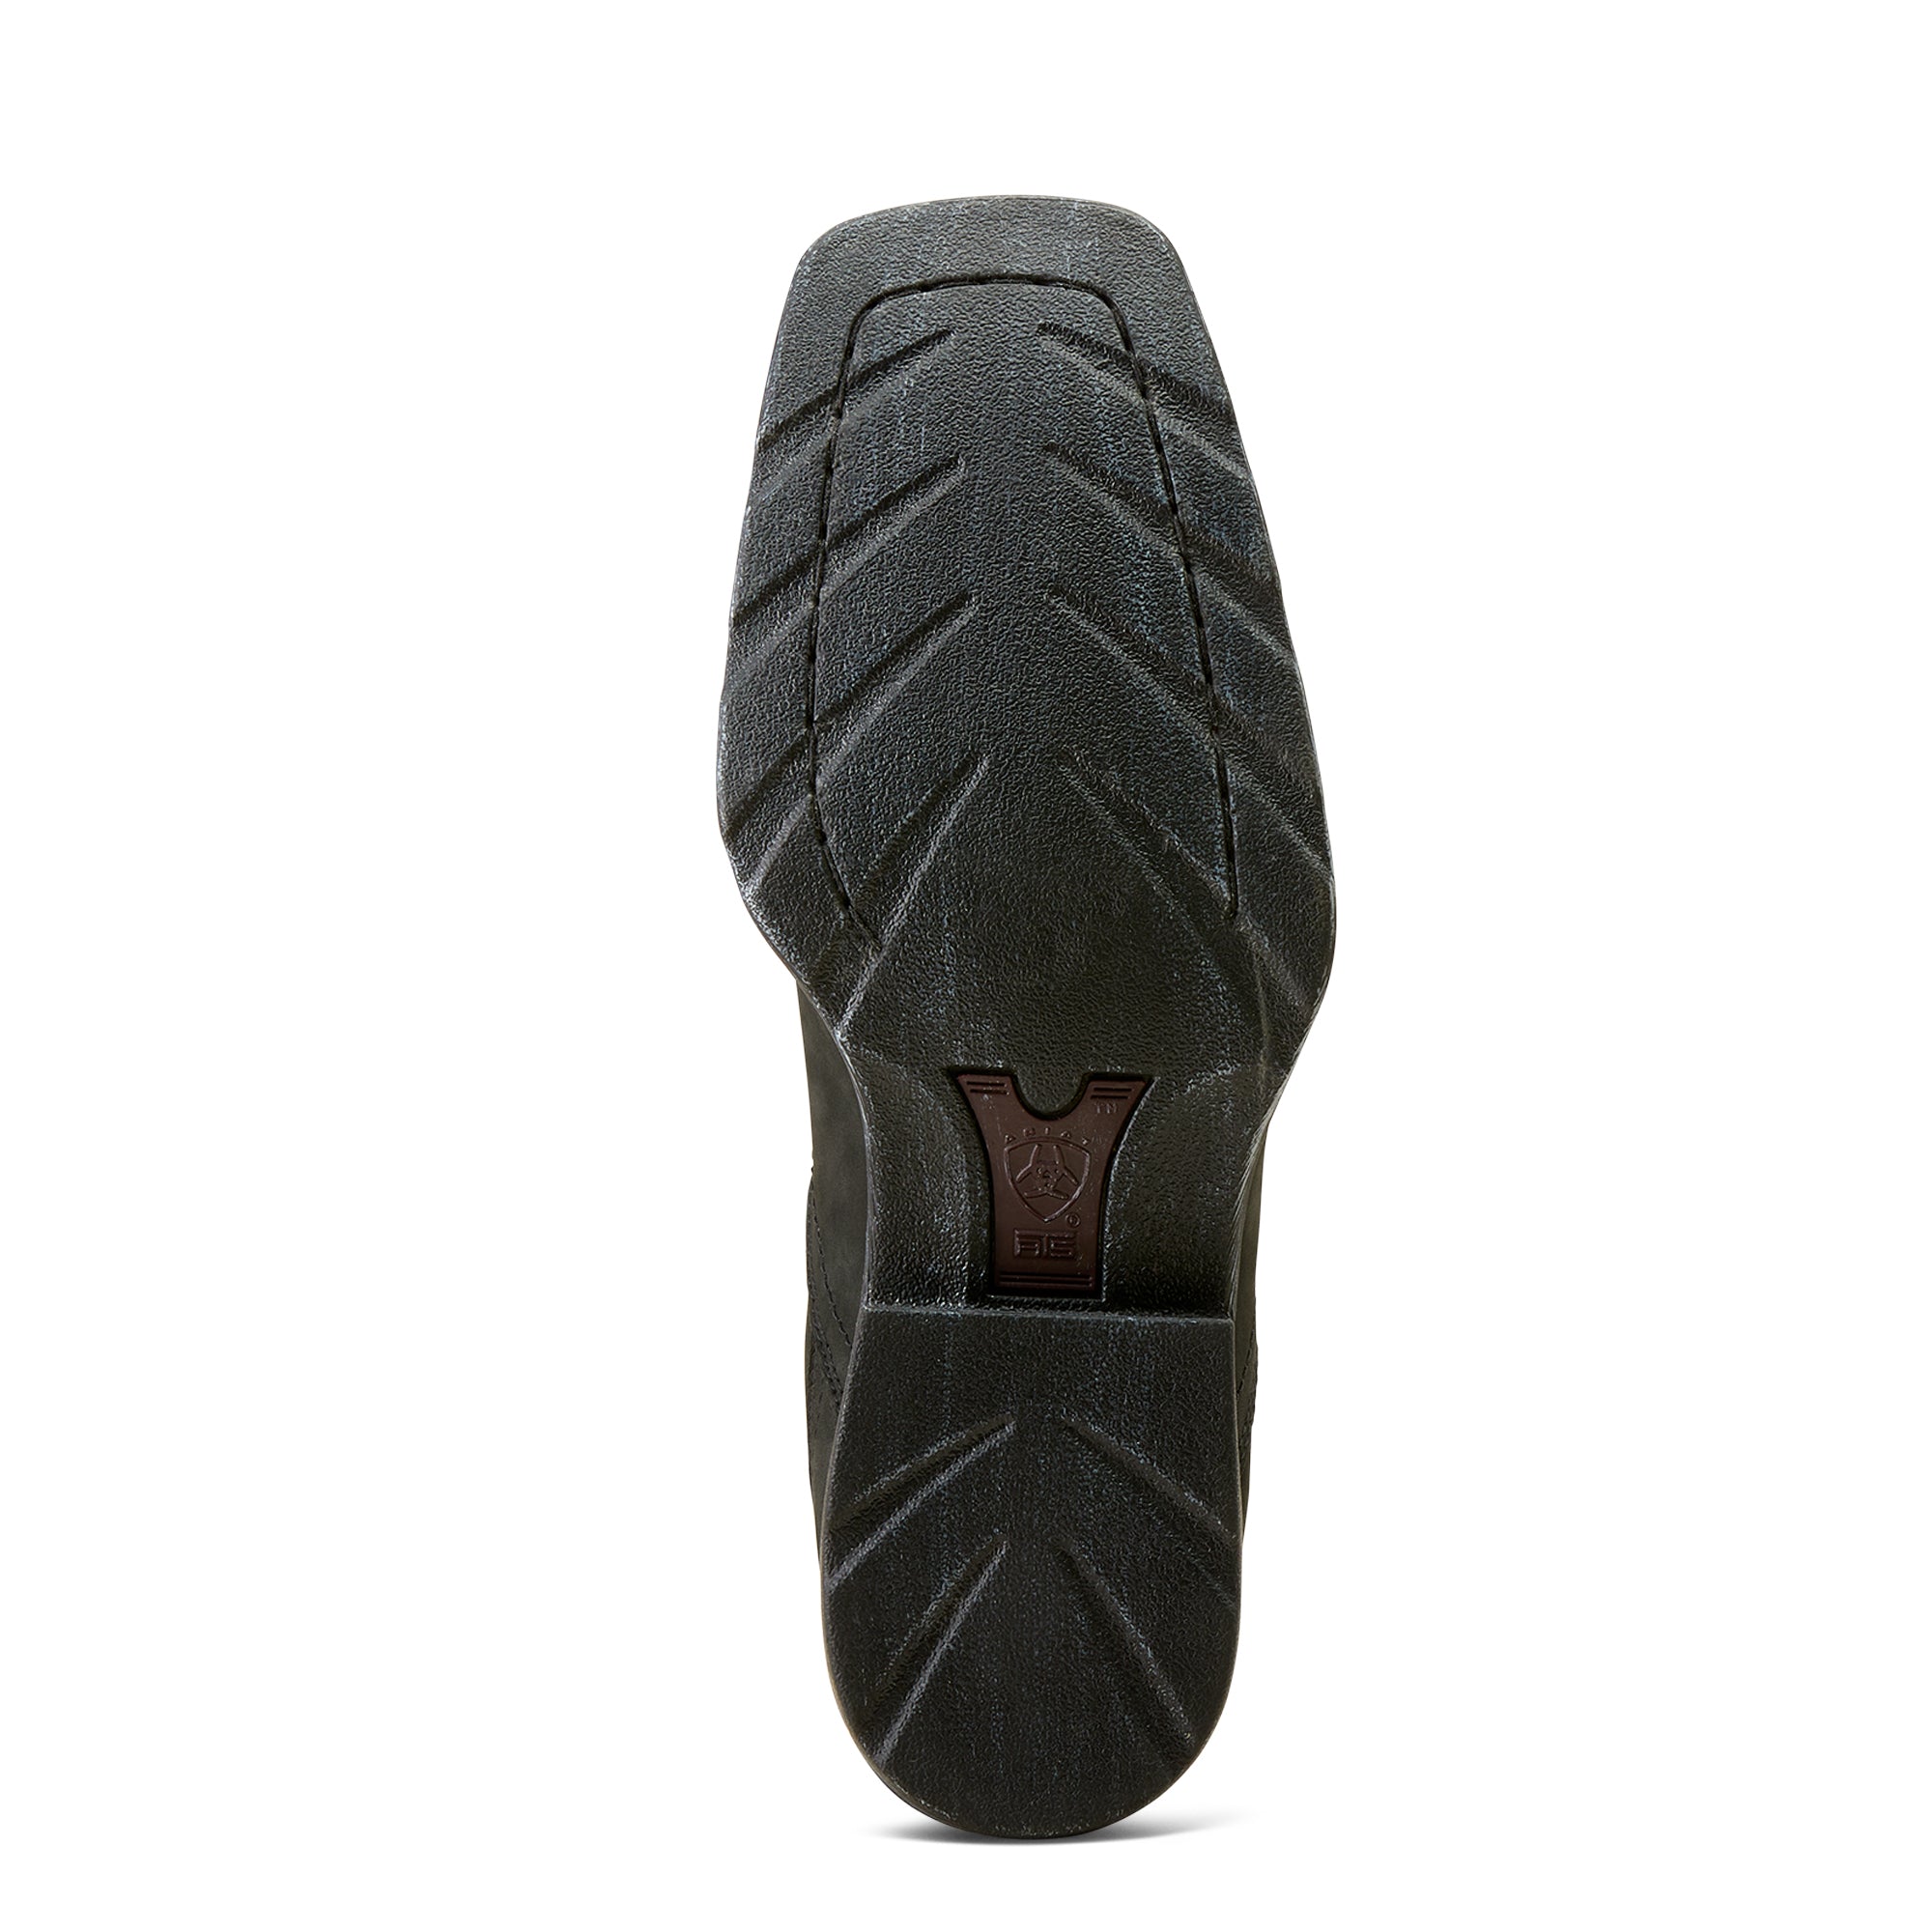 Rubber outsole view for ariat botines
